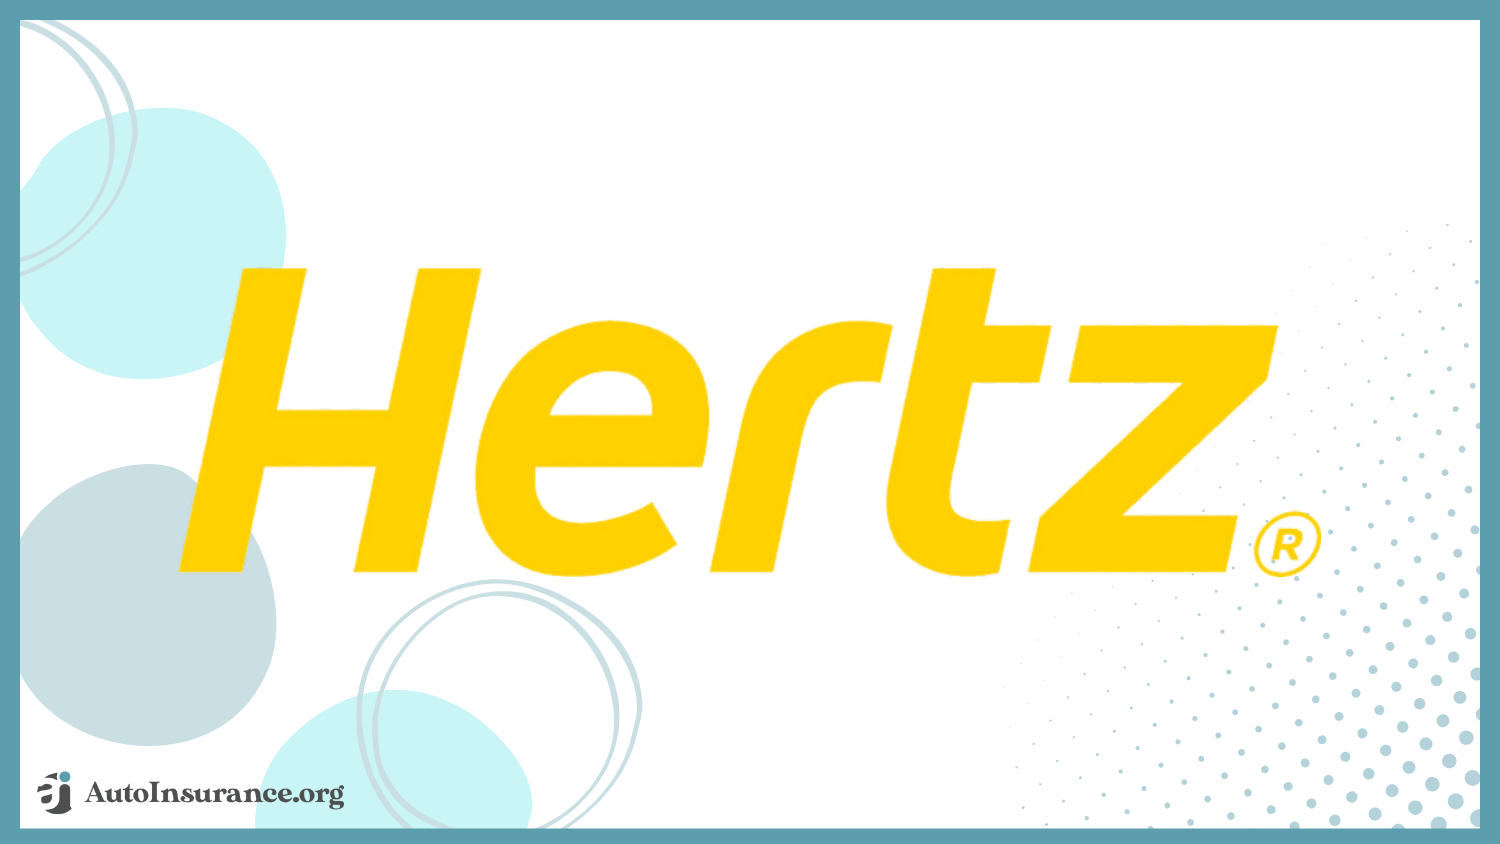 Hertz: Best Rental Auto Insurance That Covers Additional Drivers